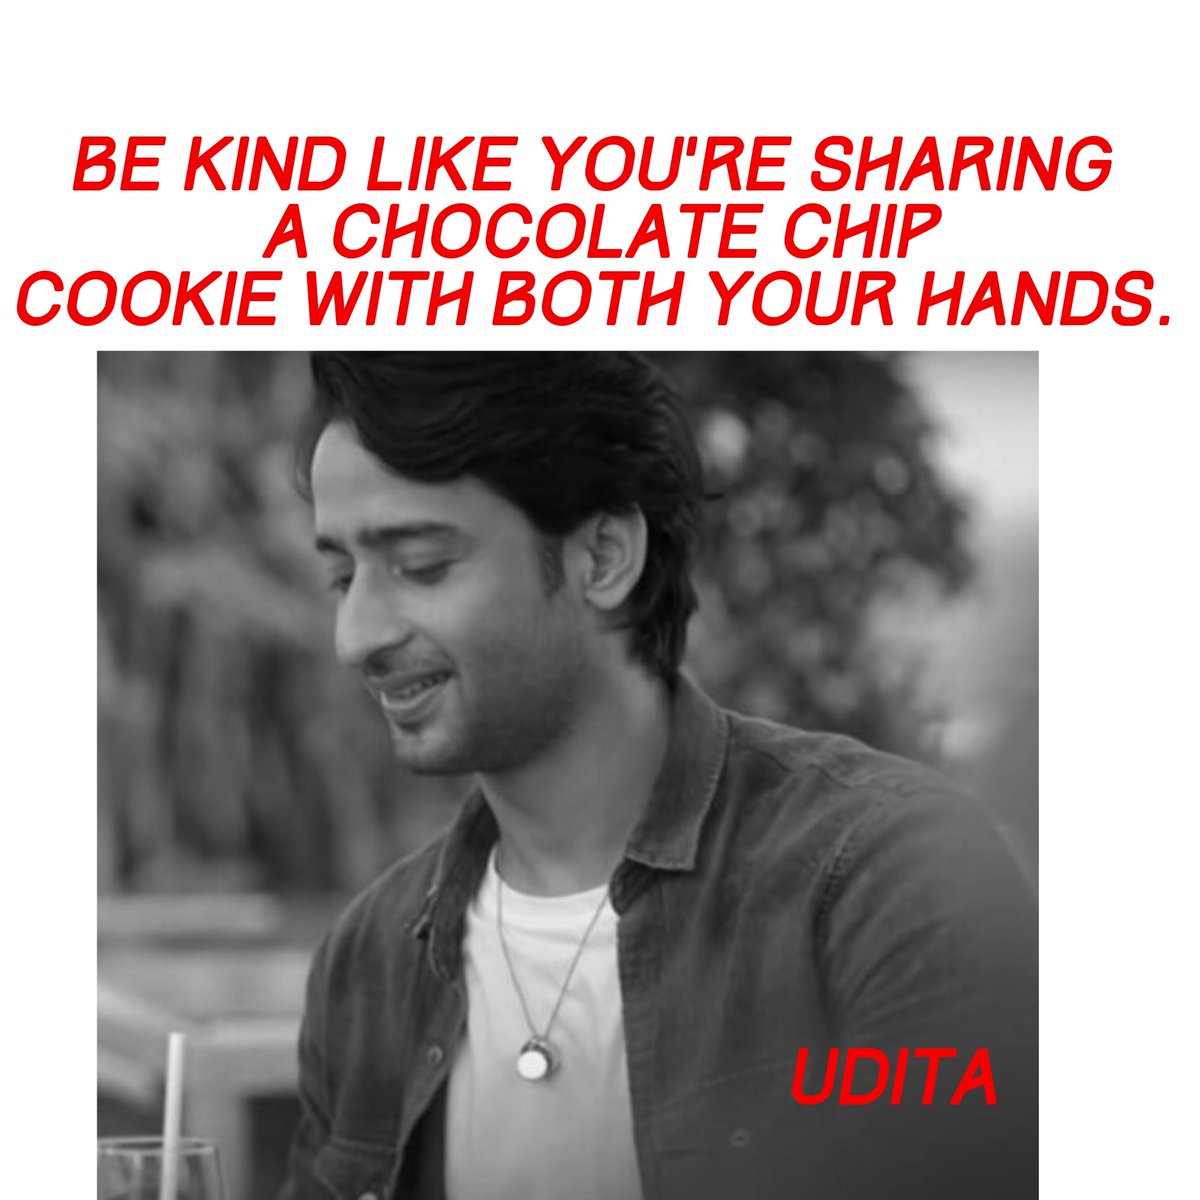 That's my unique way of celebrating the success of  #AeMereDil Be kind to others, and most importantly to yourself. Lend out a hand of kindness. Bring a smile on someone else's face, and experience tells me that's the best feeling ever.  #ShaheerSheikh  #AllWeNeedIsLove